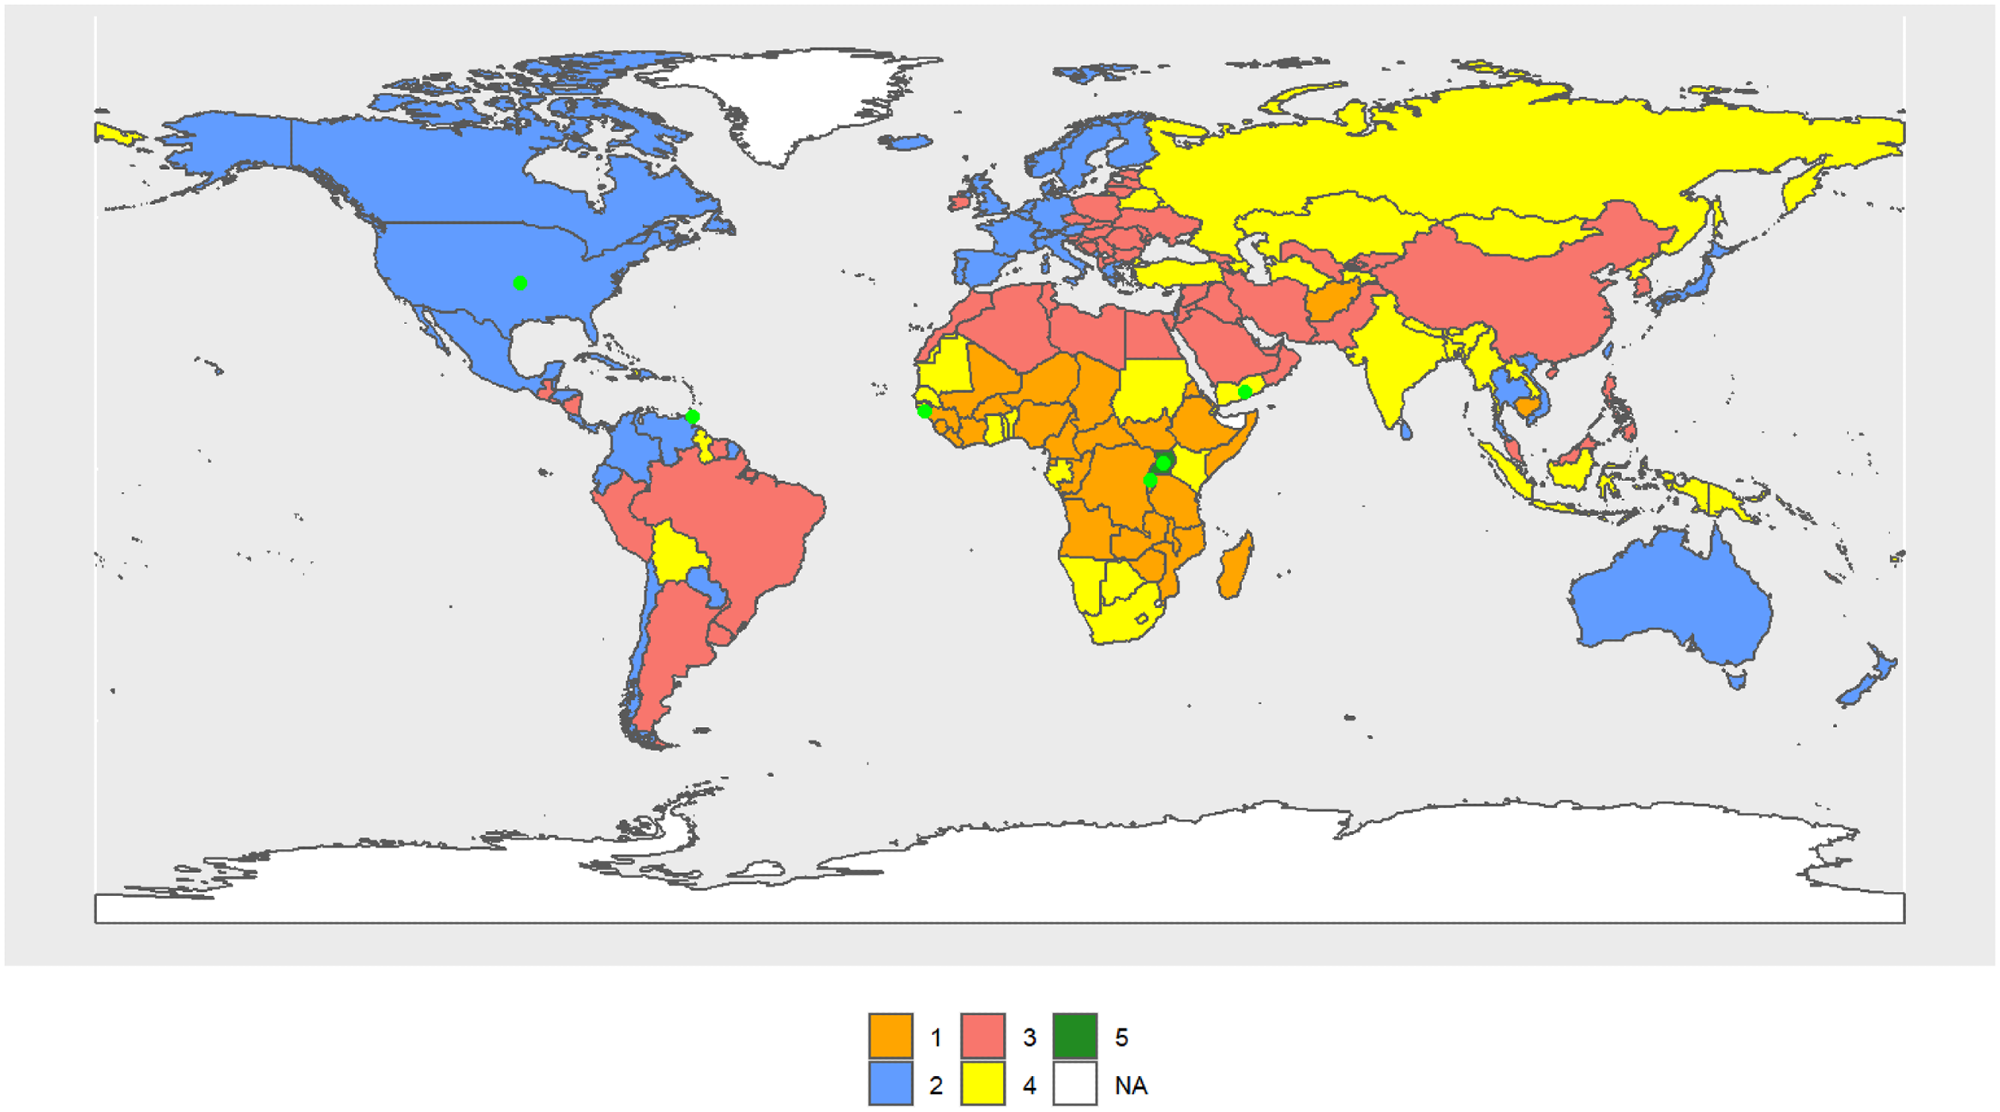 World map of 1990 male clusters. Study: Convergence and divergence in mortality: A global study from 1990 to 2030.